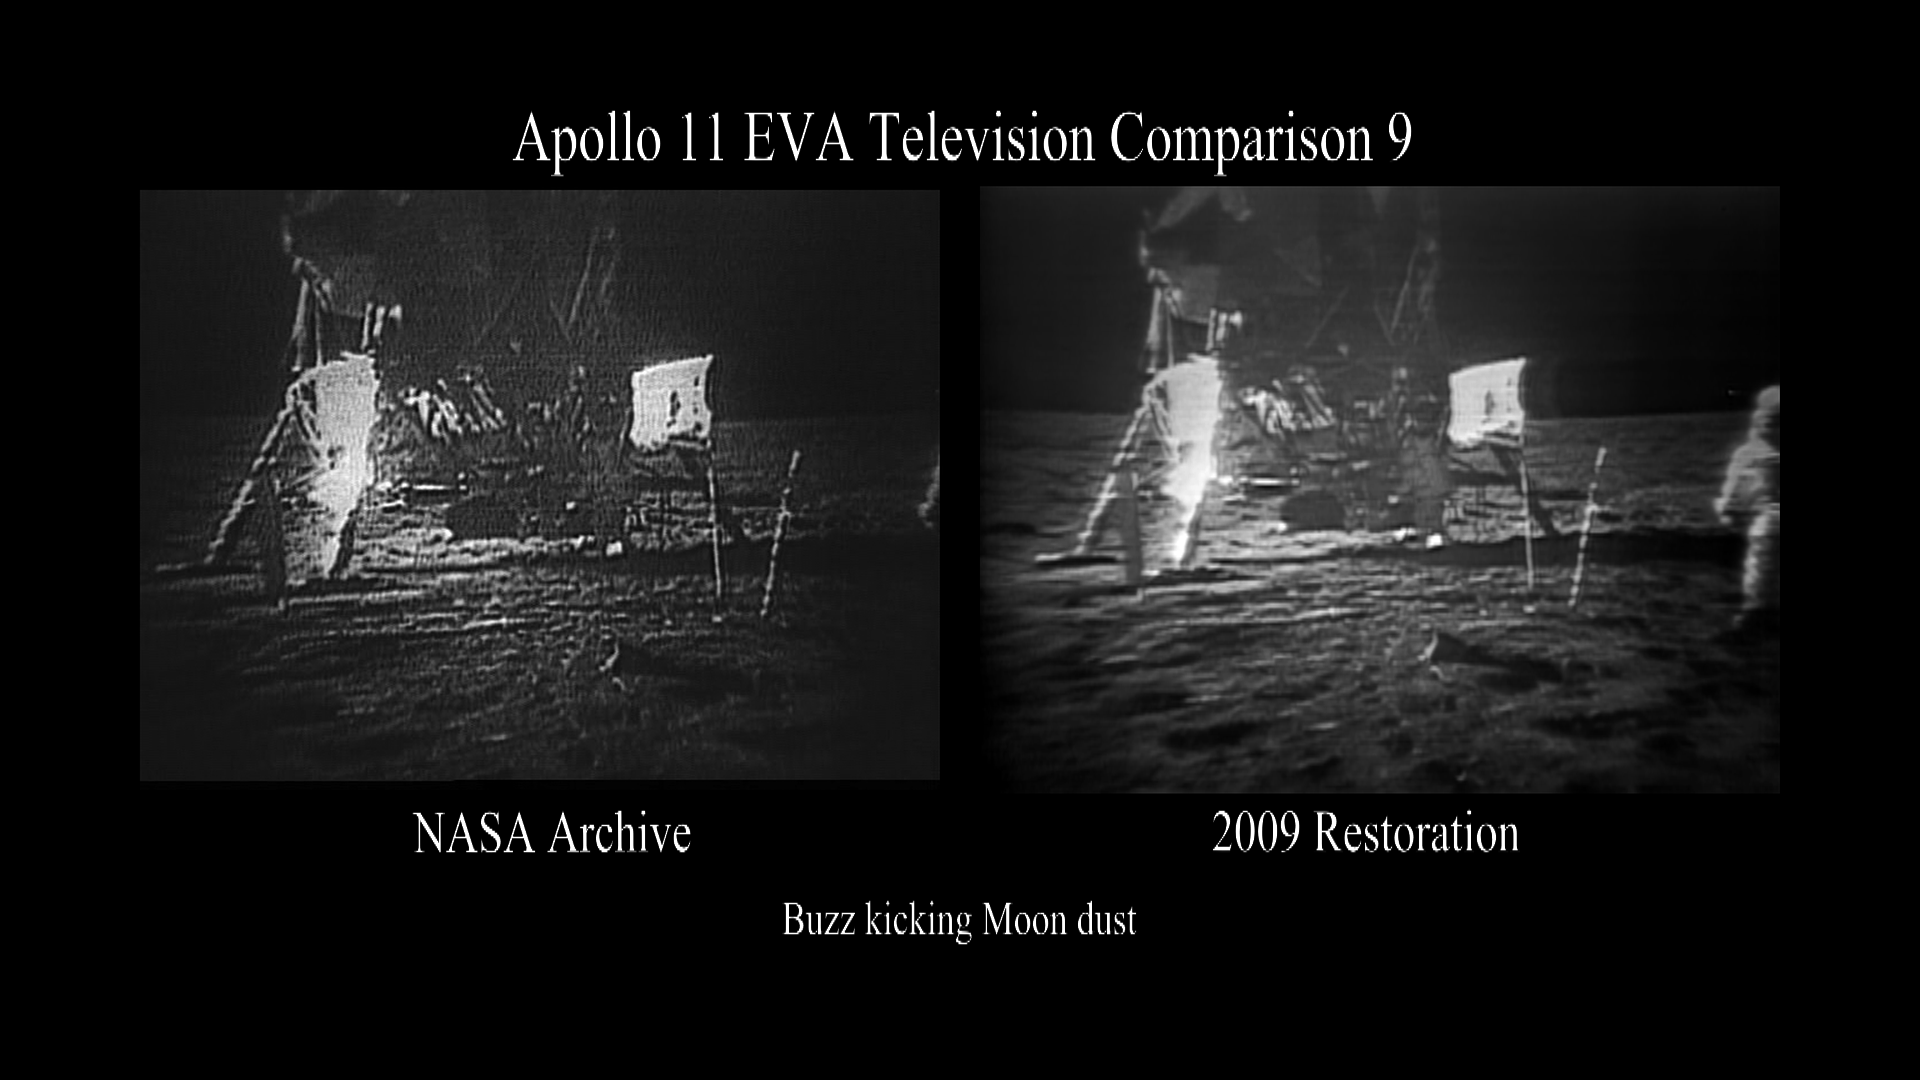 A side by side comparison of the original broadcast video and partially restored video of Buzz Aldrin kicking moon dust.